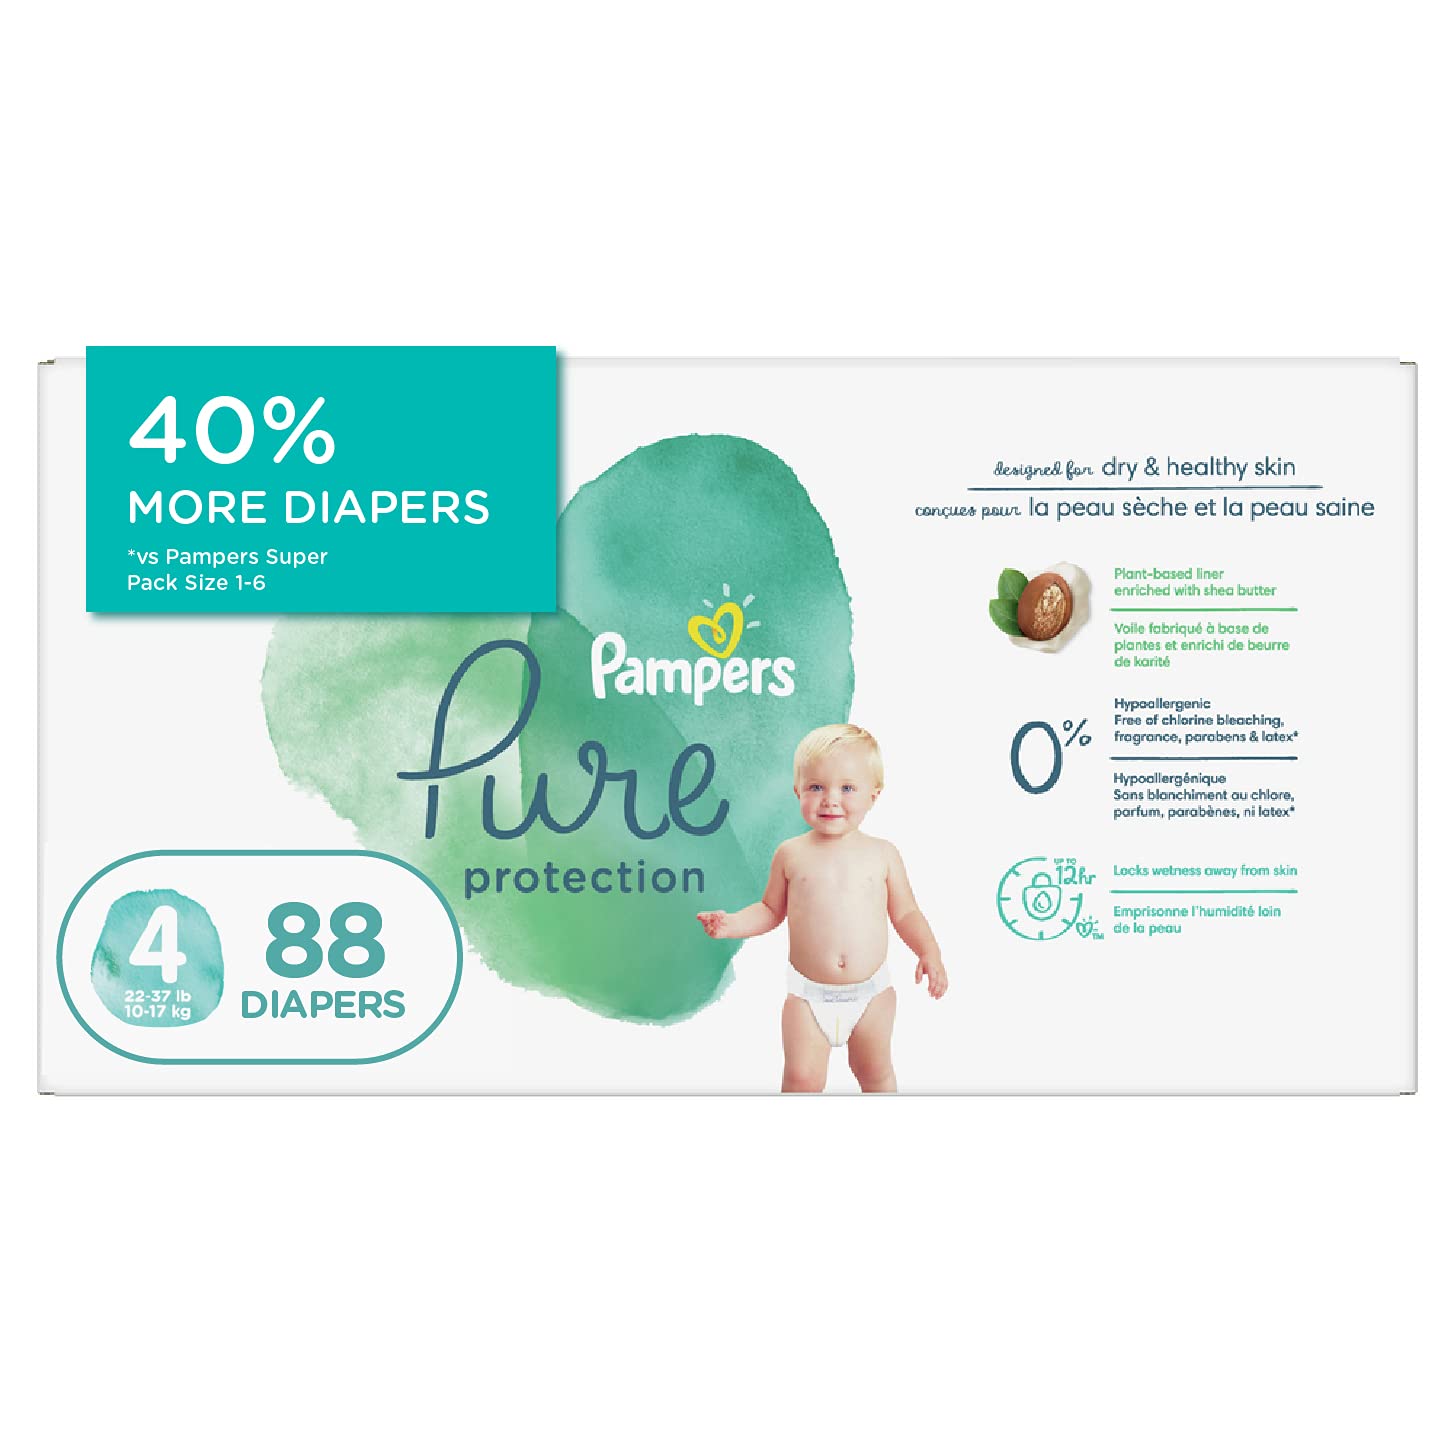 pampers dni tygodnia